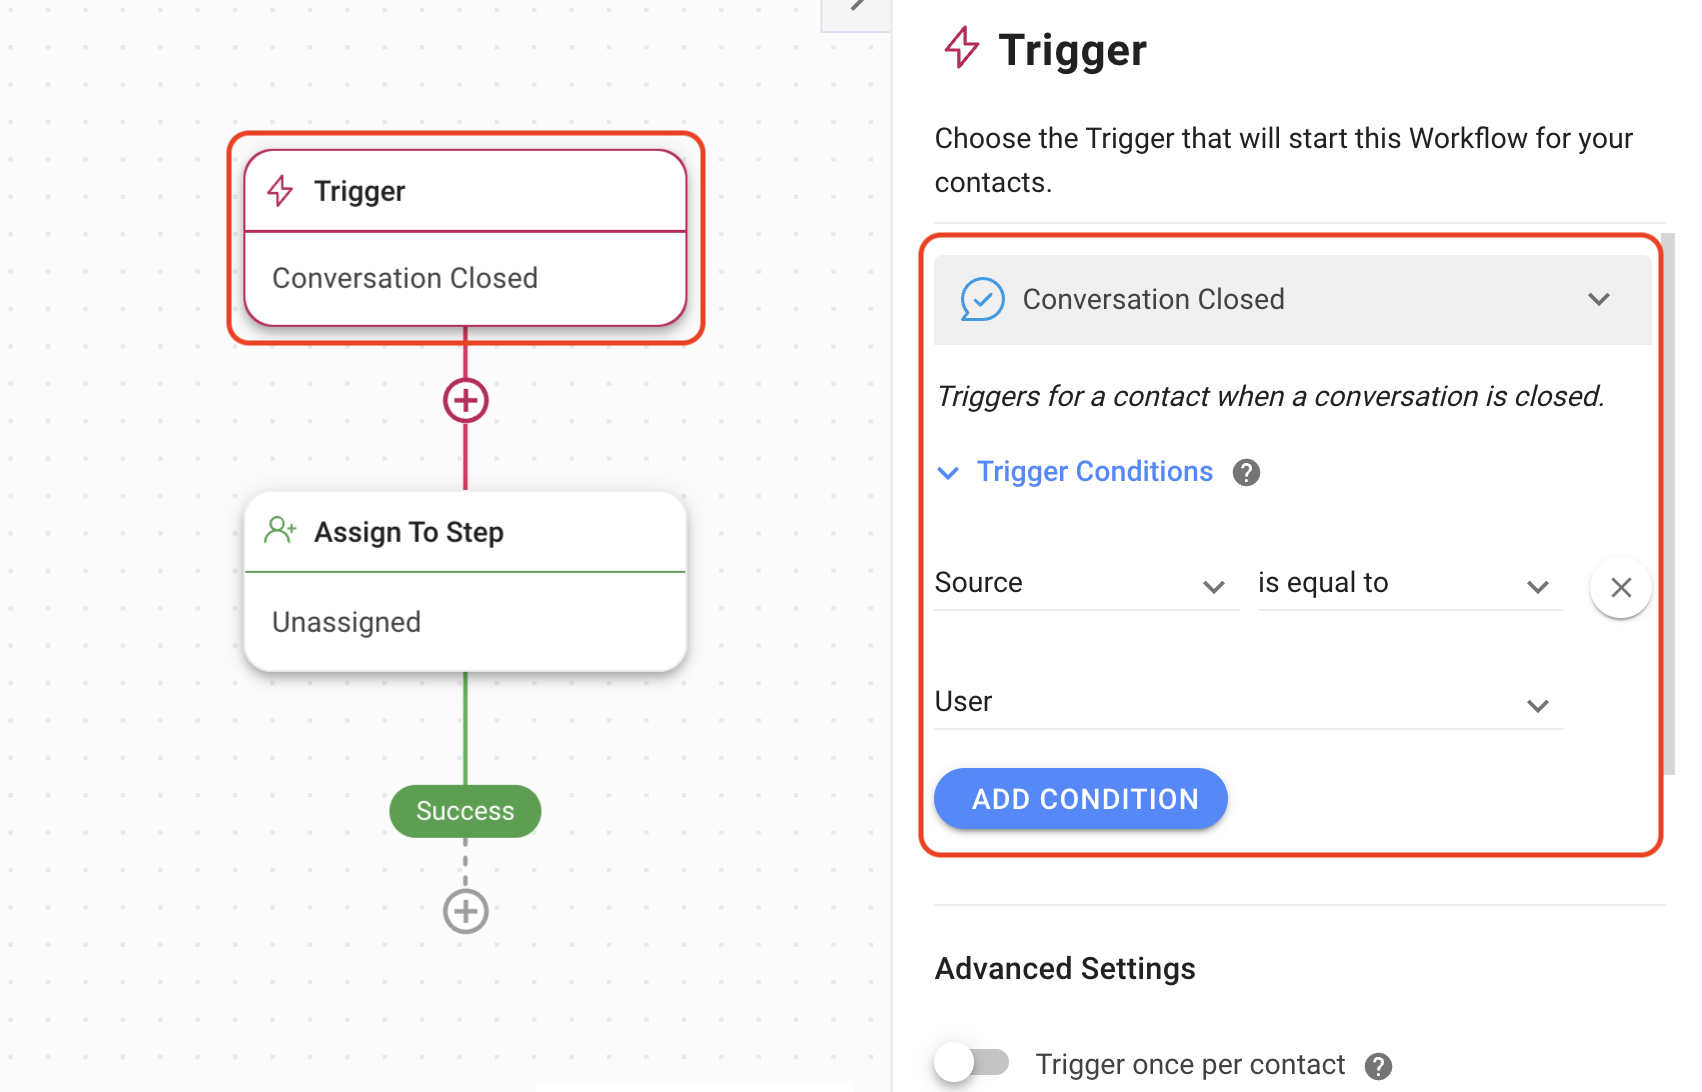 Configure Trigger to start the Unassign Agent Workflow when a conversation is closed by an agent. 